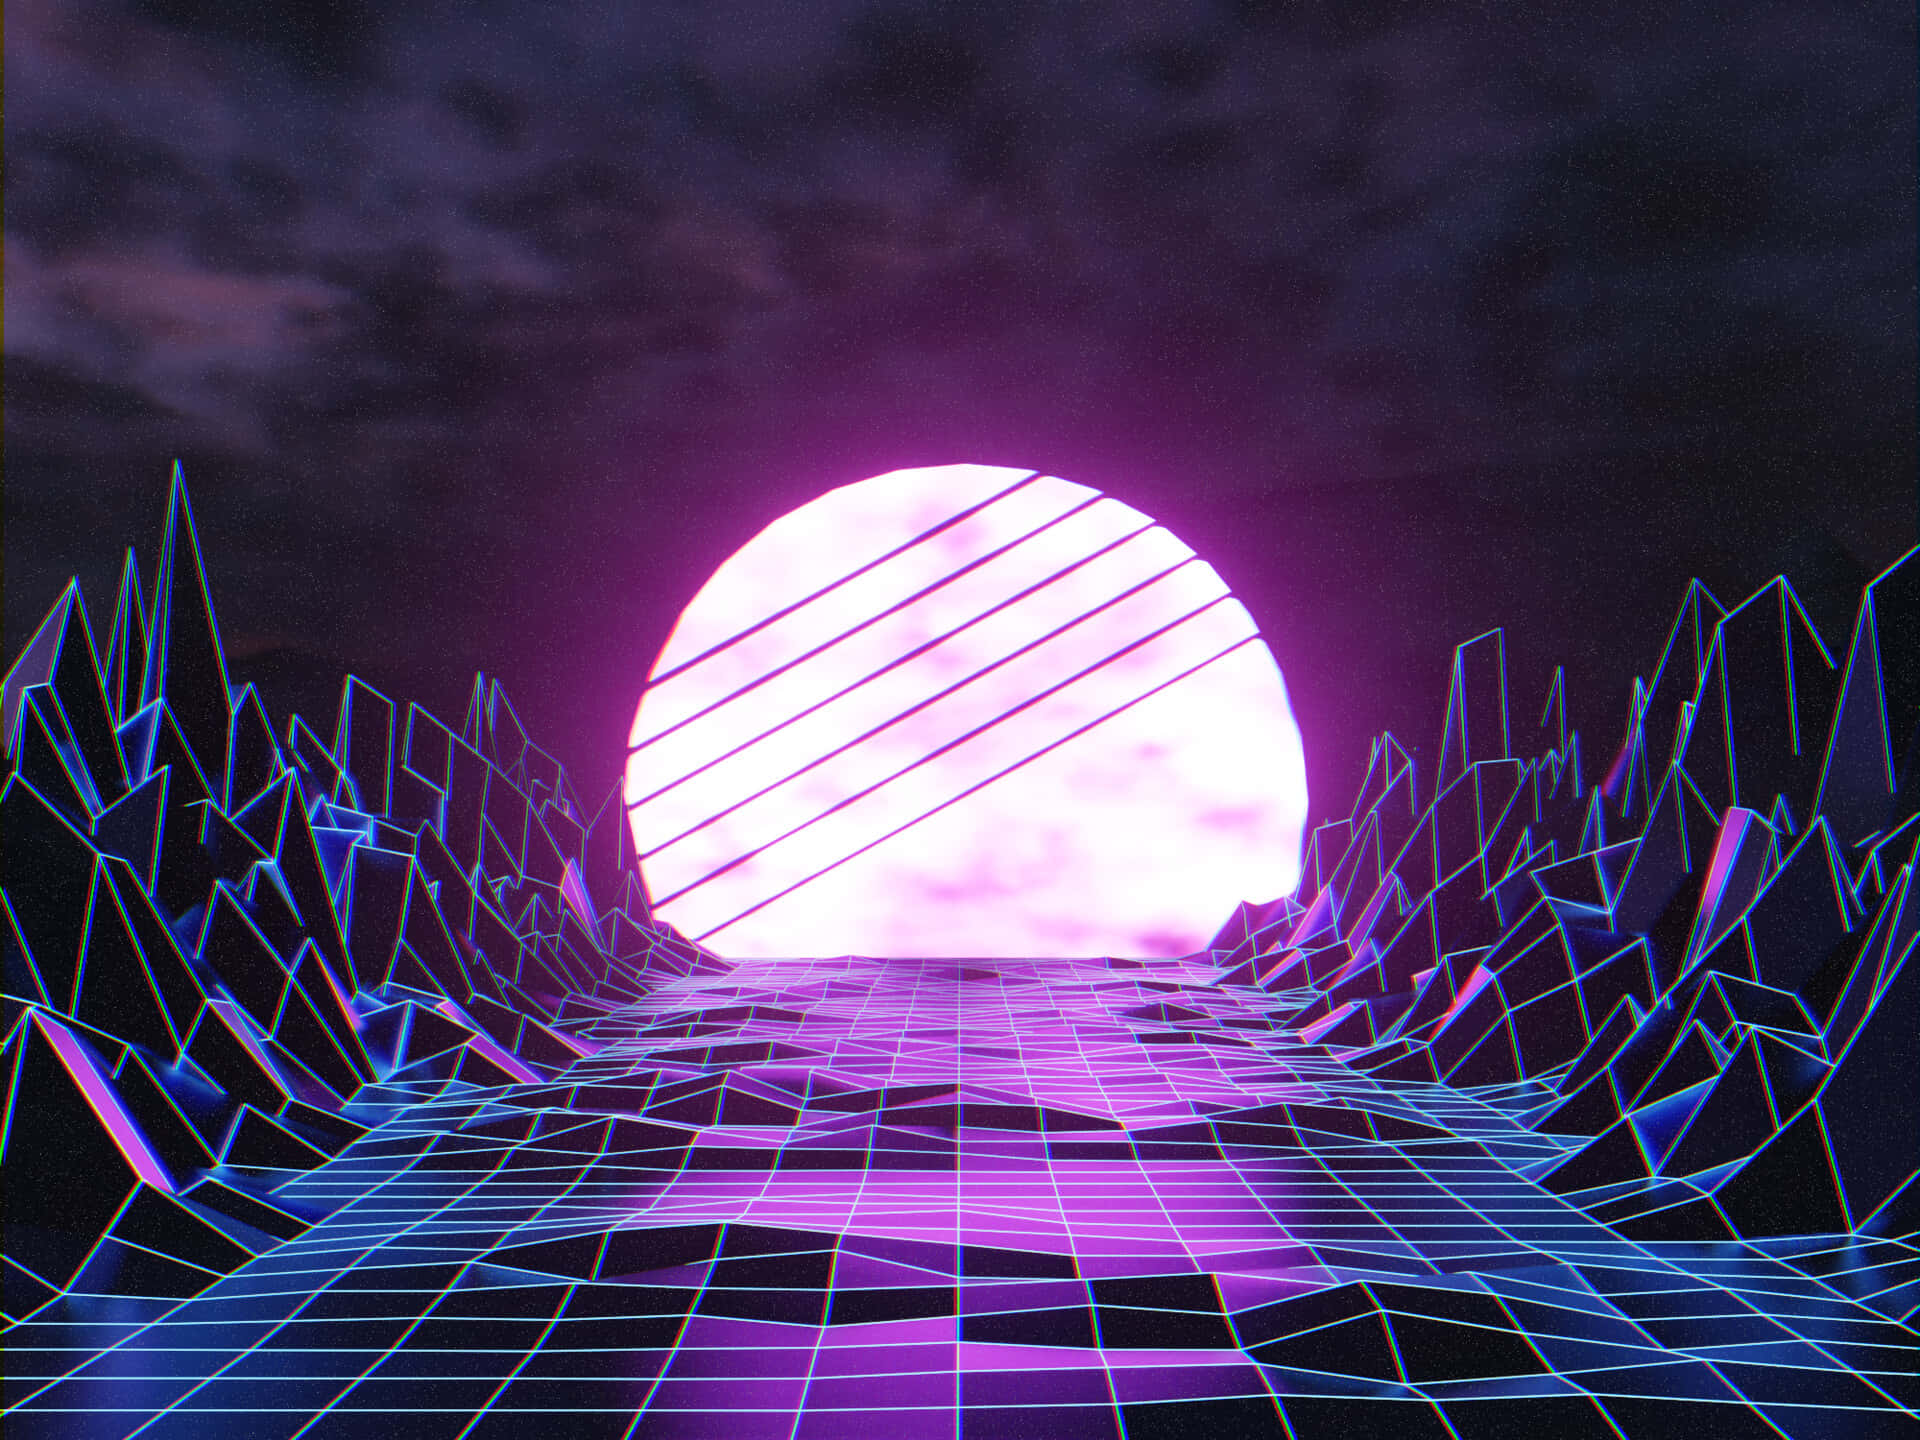 Get Groovy With This Fun Retro Vaporwave Aesthetic